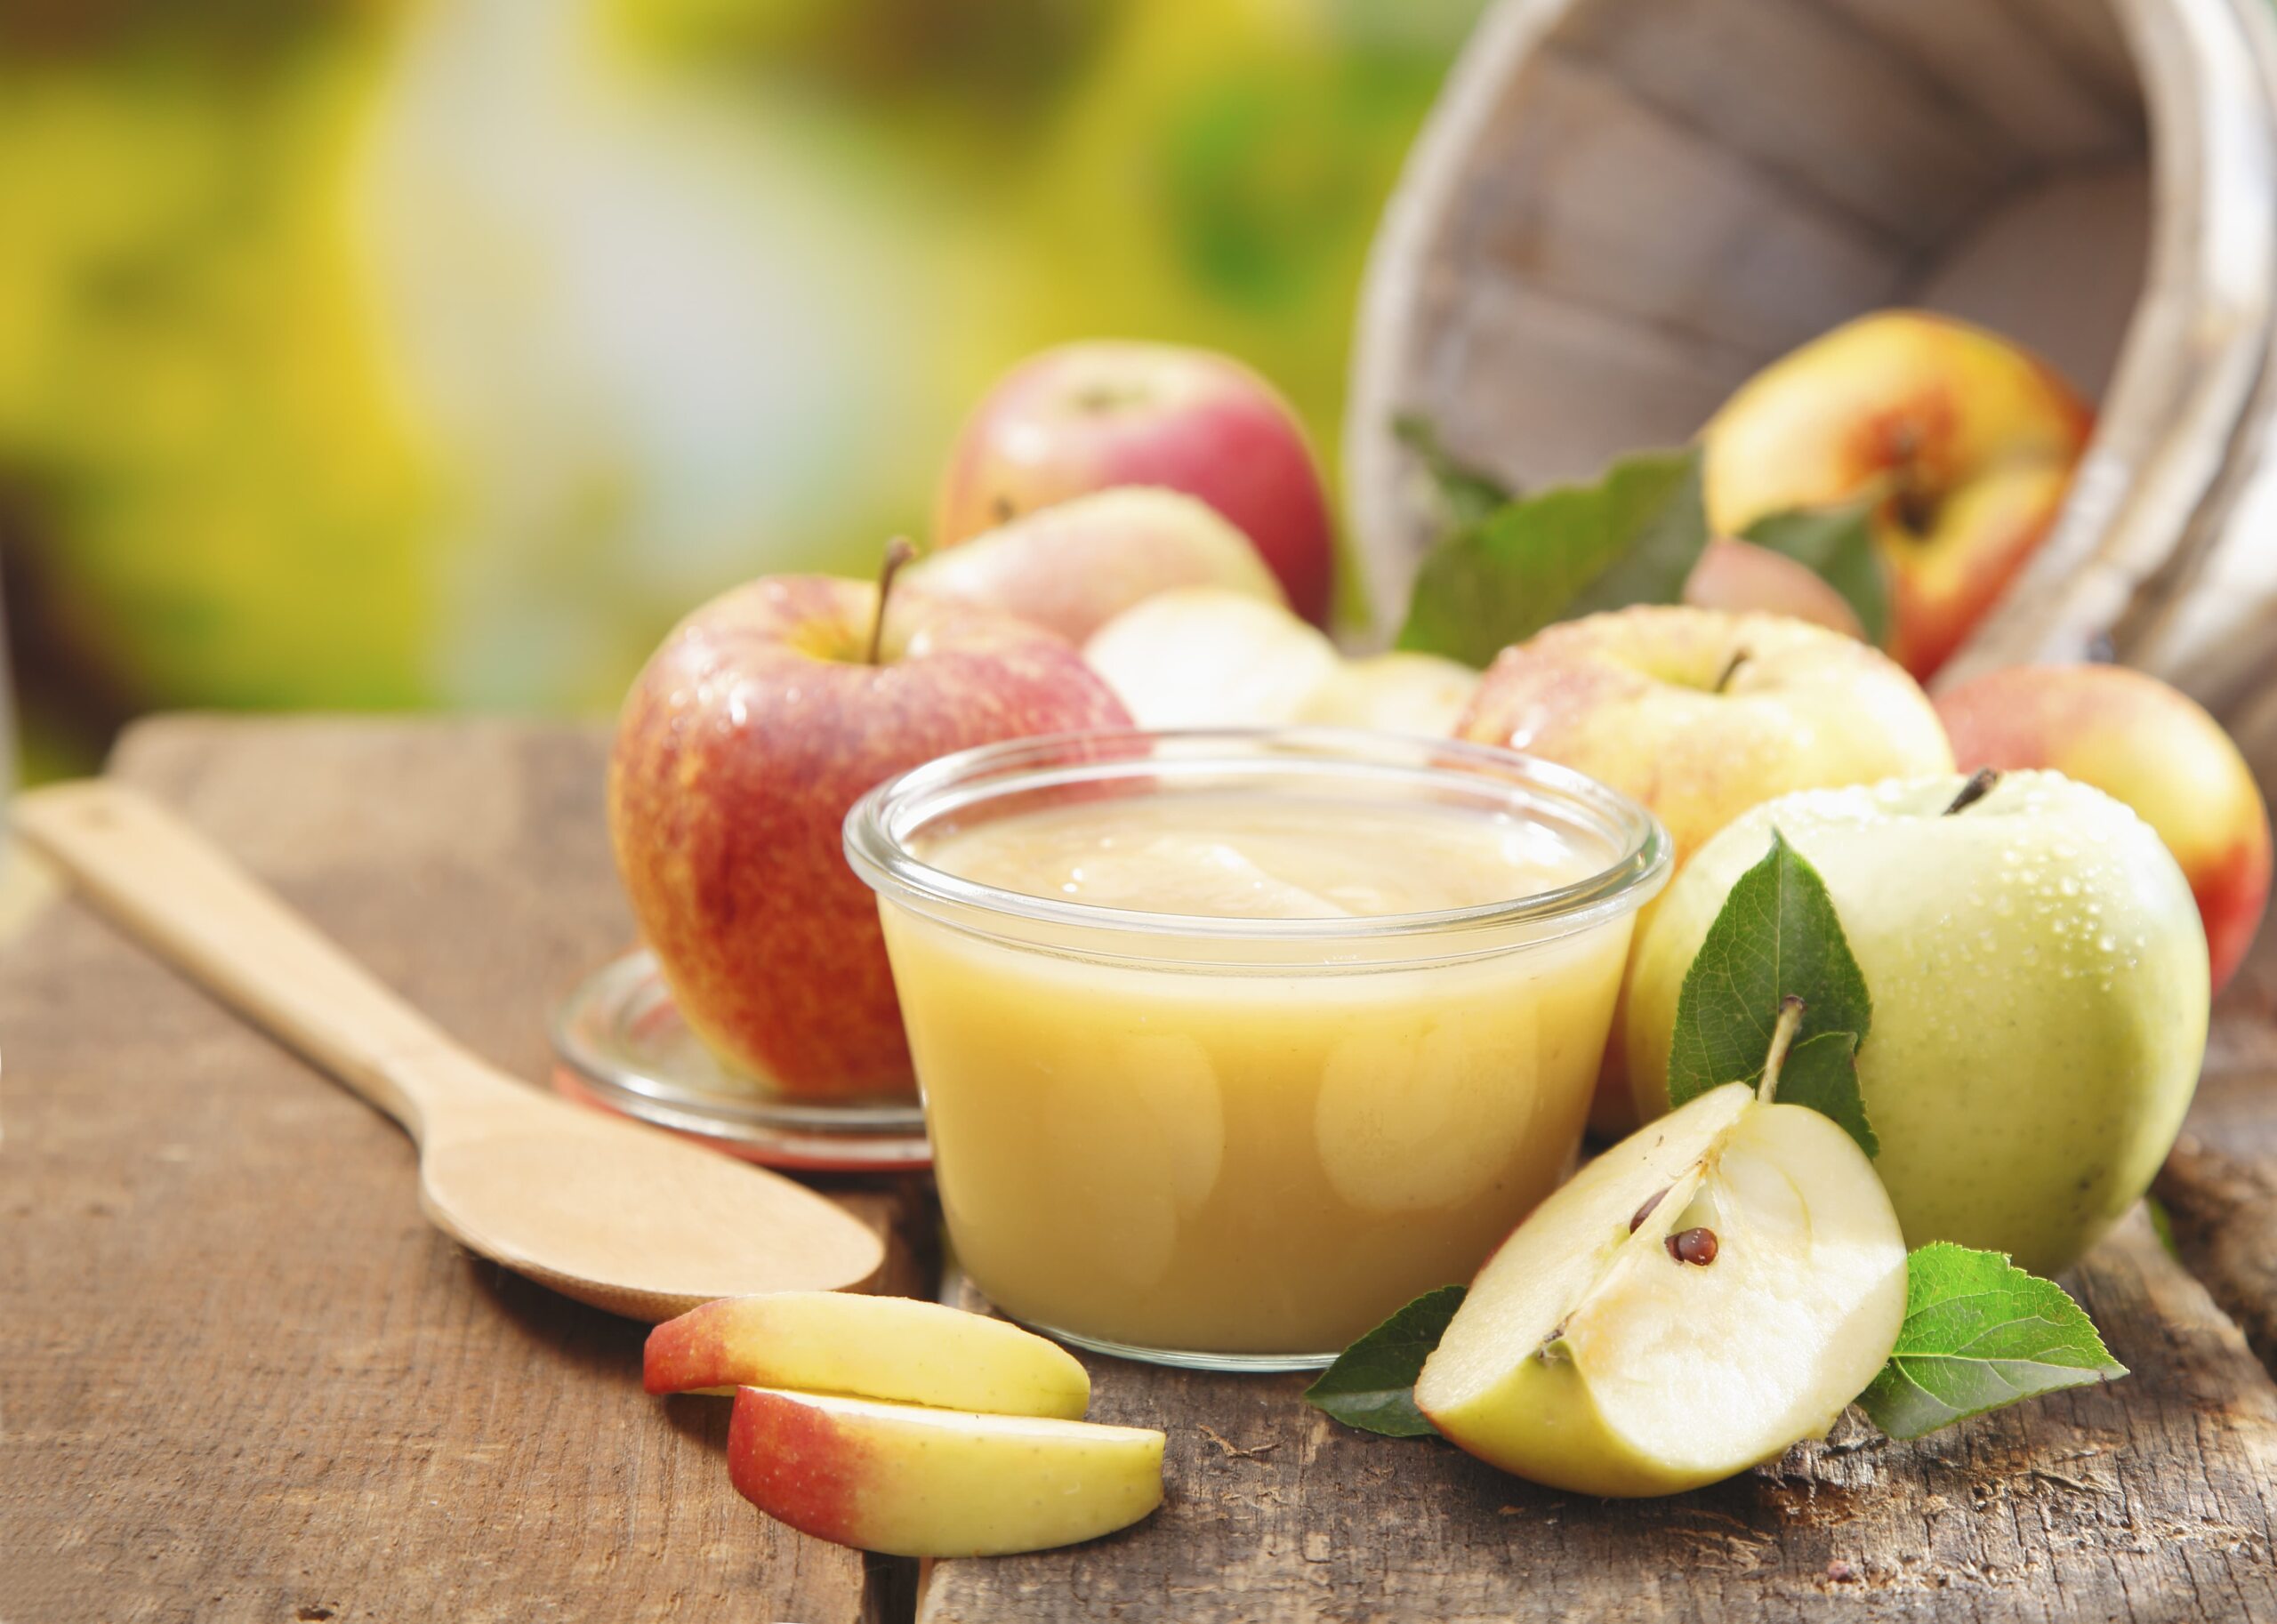 Is Apple Sauce Healthy for Me?